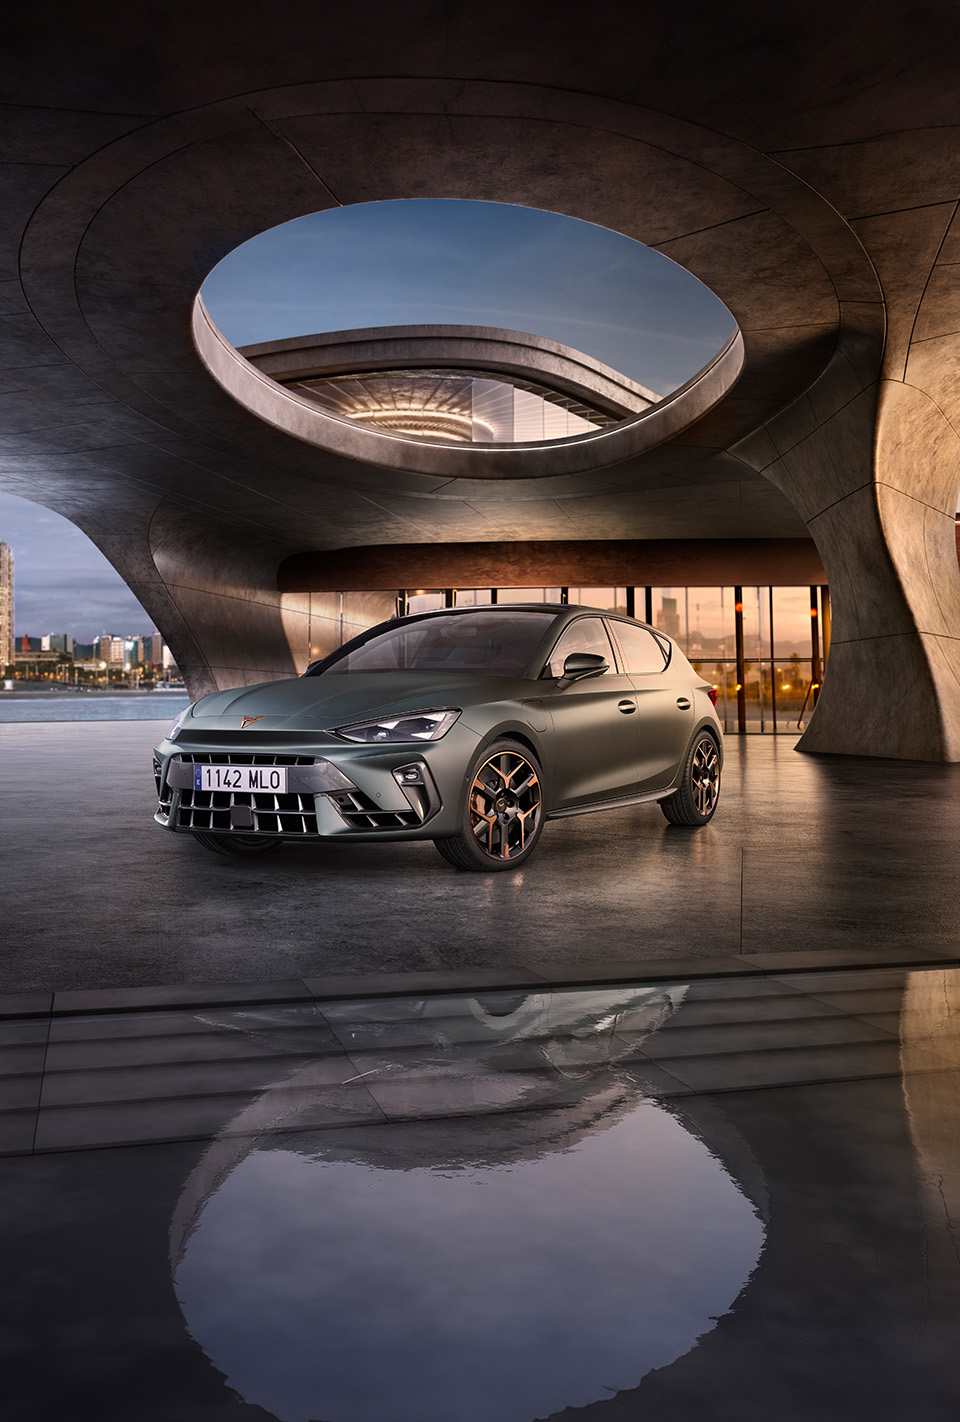 The 2024 Century bronze matte CUPRA Formentor parked on a reflective waterfront promenade. The sporty and aerodynamic new vehicle is positioned centre frame. The setting features futuristic architecture and Barcelona’s glowing city skyline at dusk.